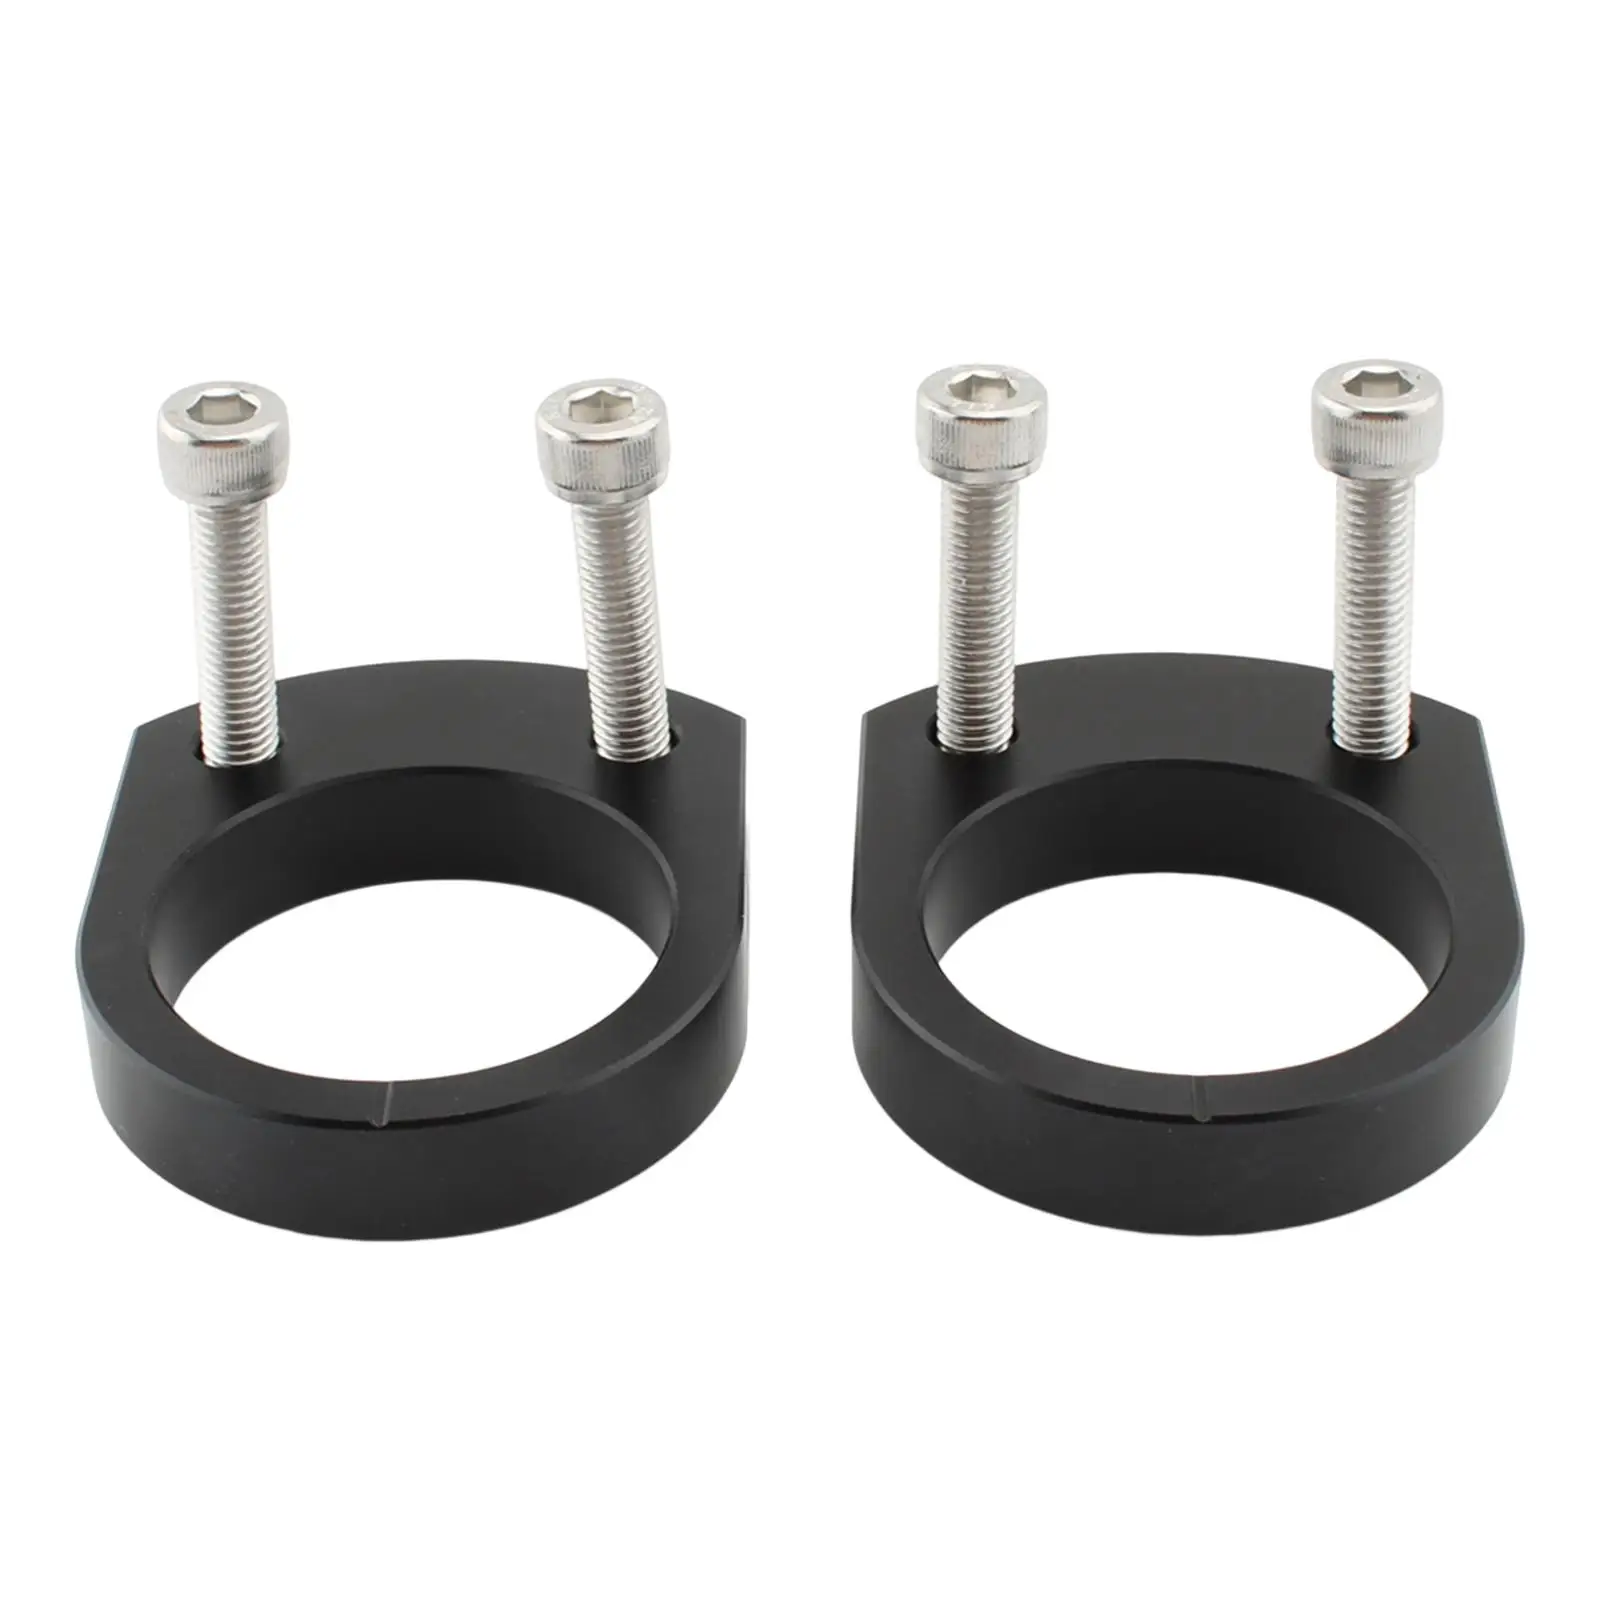 2 Pieces Motorcycle Handlebar Risers 14mm Heightening Handlebar Clamp Mount for Kawasaki ZX-14R Zzr14 Motorcycle Parts